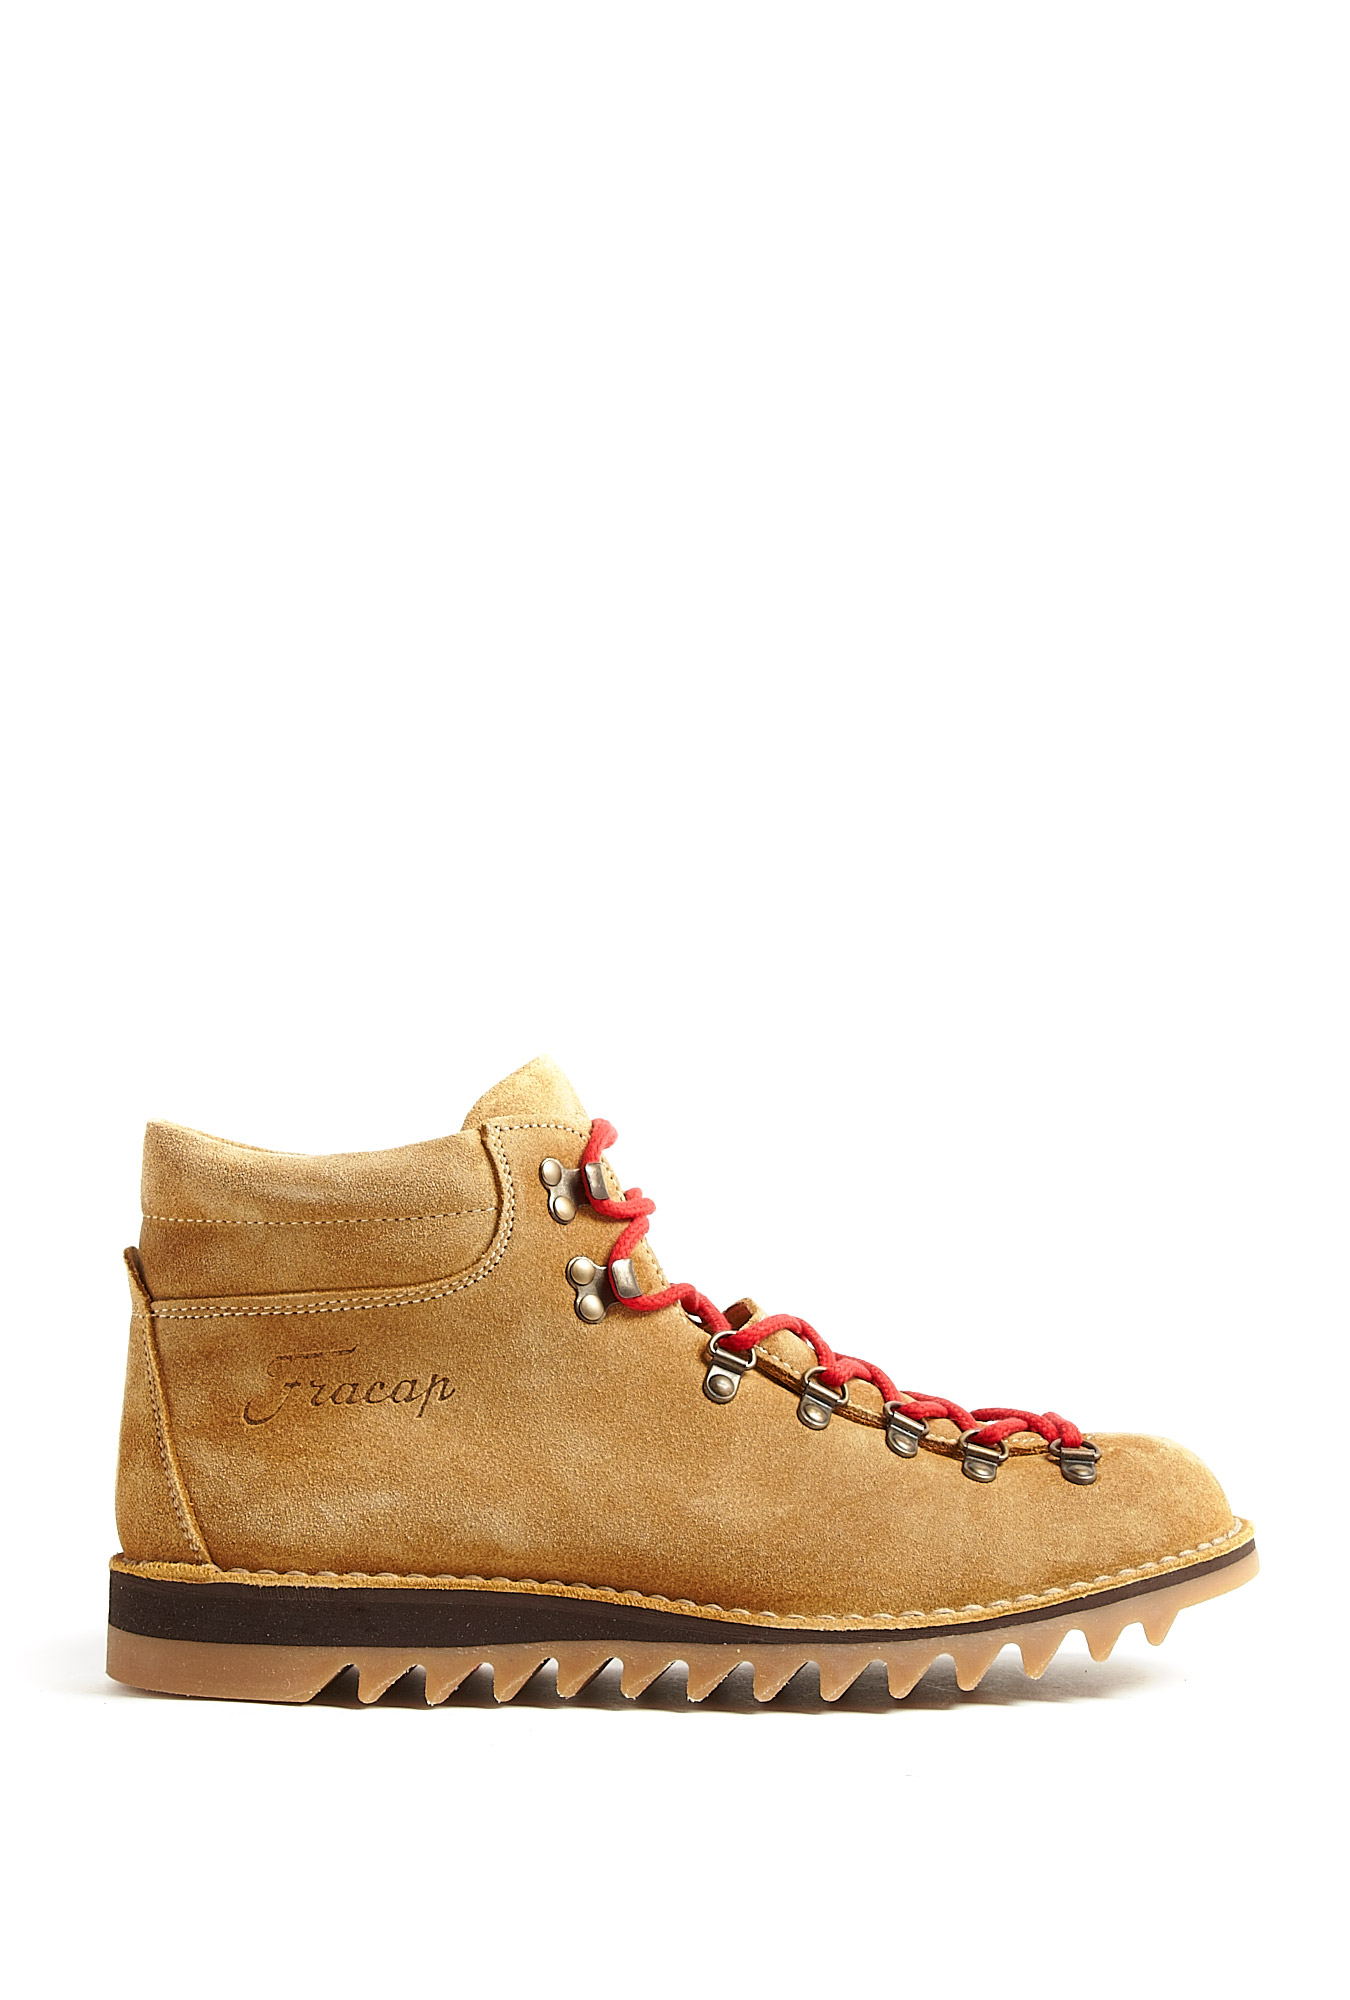 Fracap Stone Suede Ripple Soled Hiking Boots in Brown for Men (tan) | Lyst